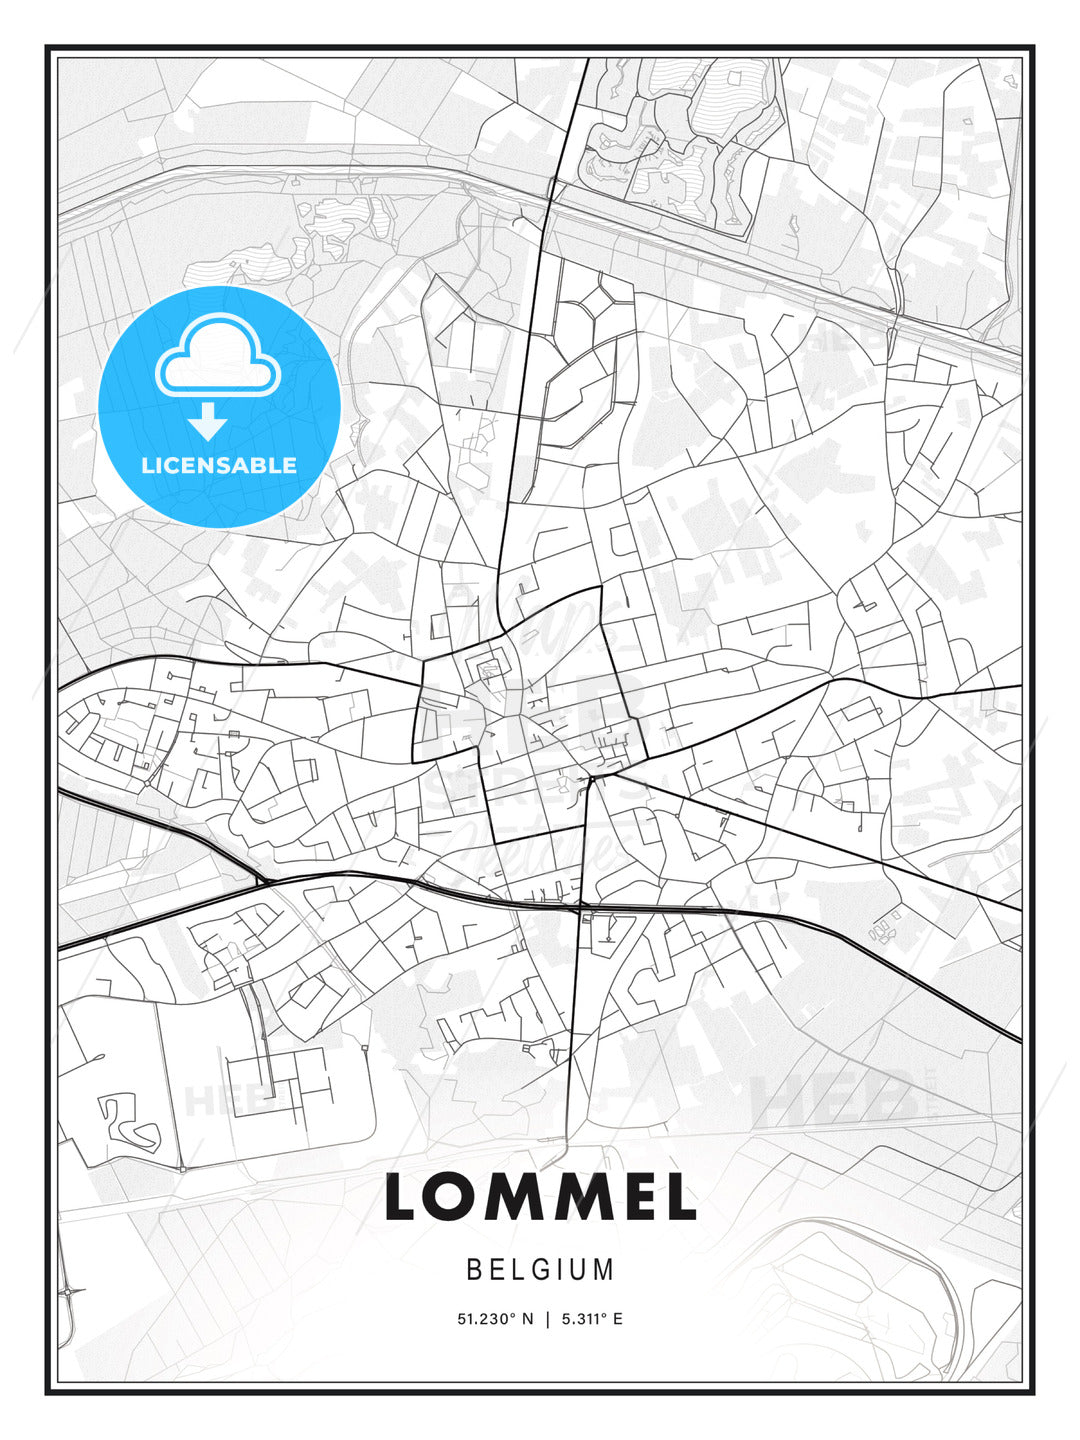 Lommel, Belgium, Modern Print Template in Various Formats - HEBSTREITS Sketches